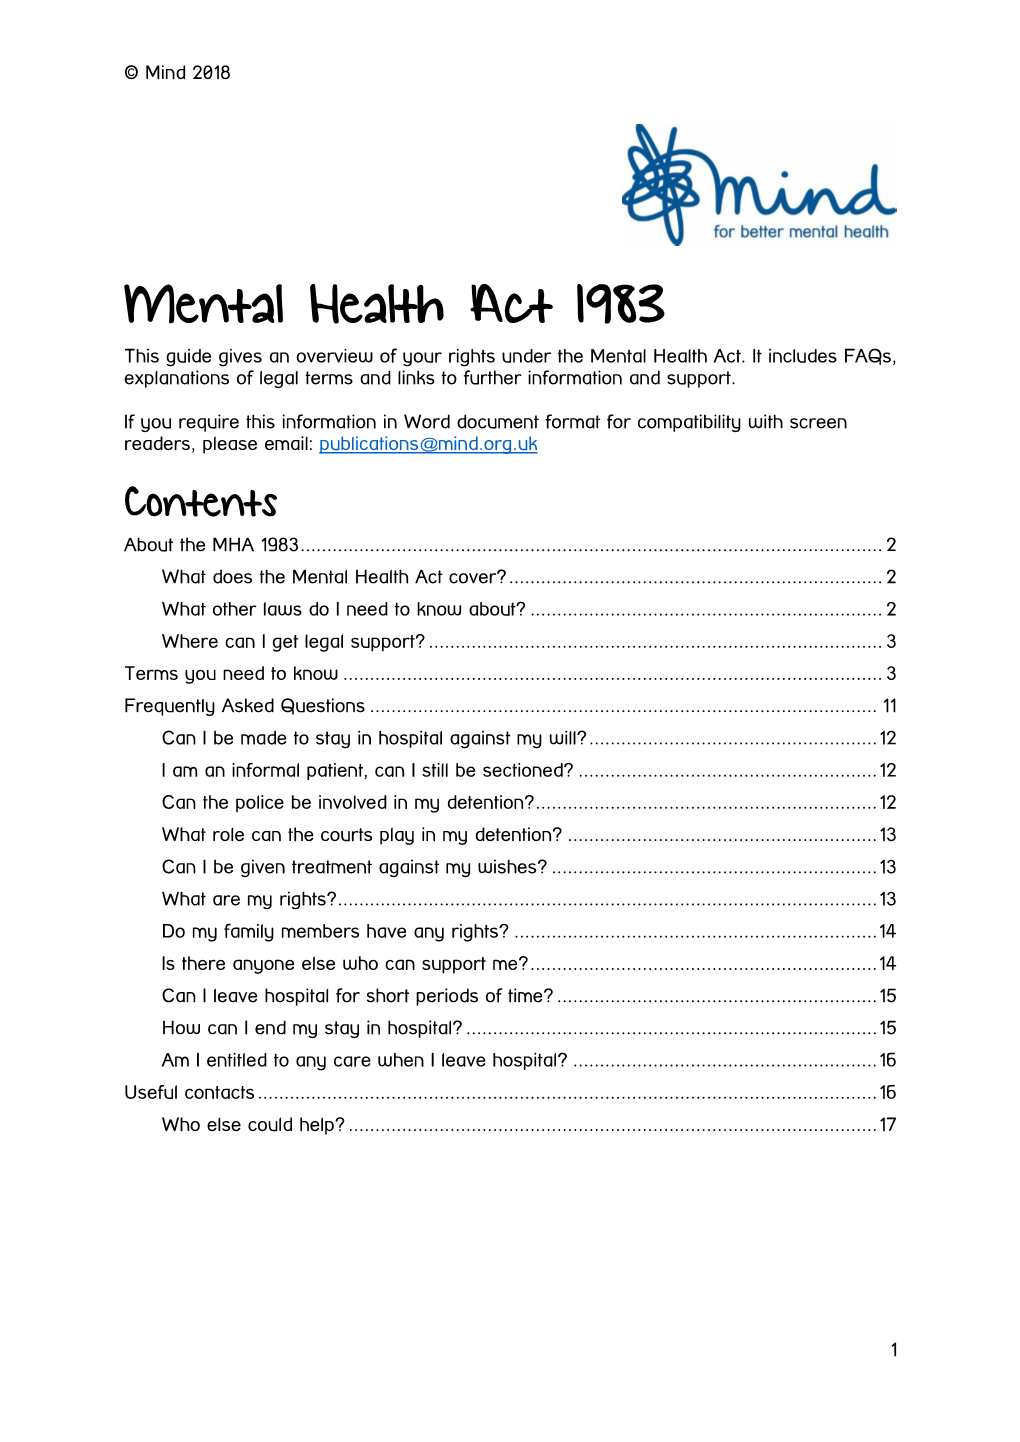 Mental Health Act 1983 This Guide Gives an Overview of Your Rights Under the Mental Health Act